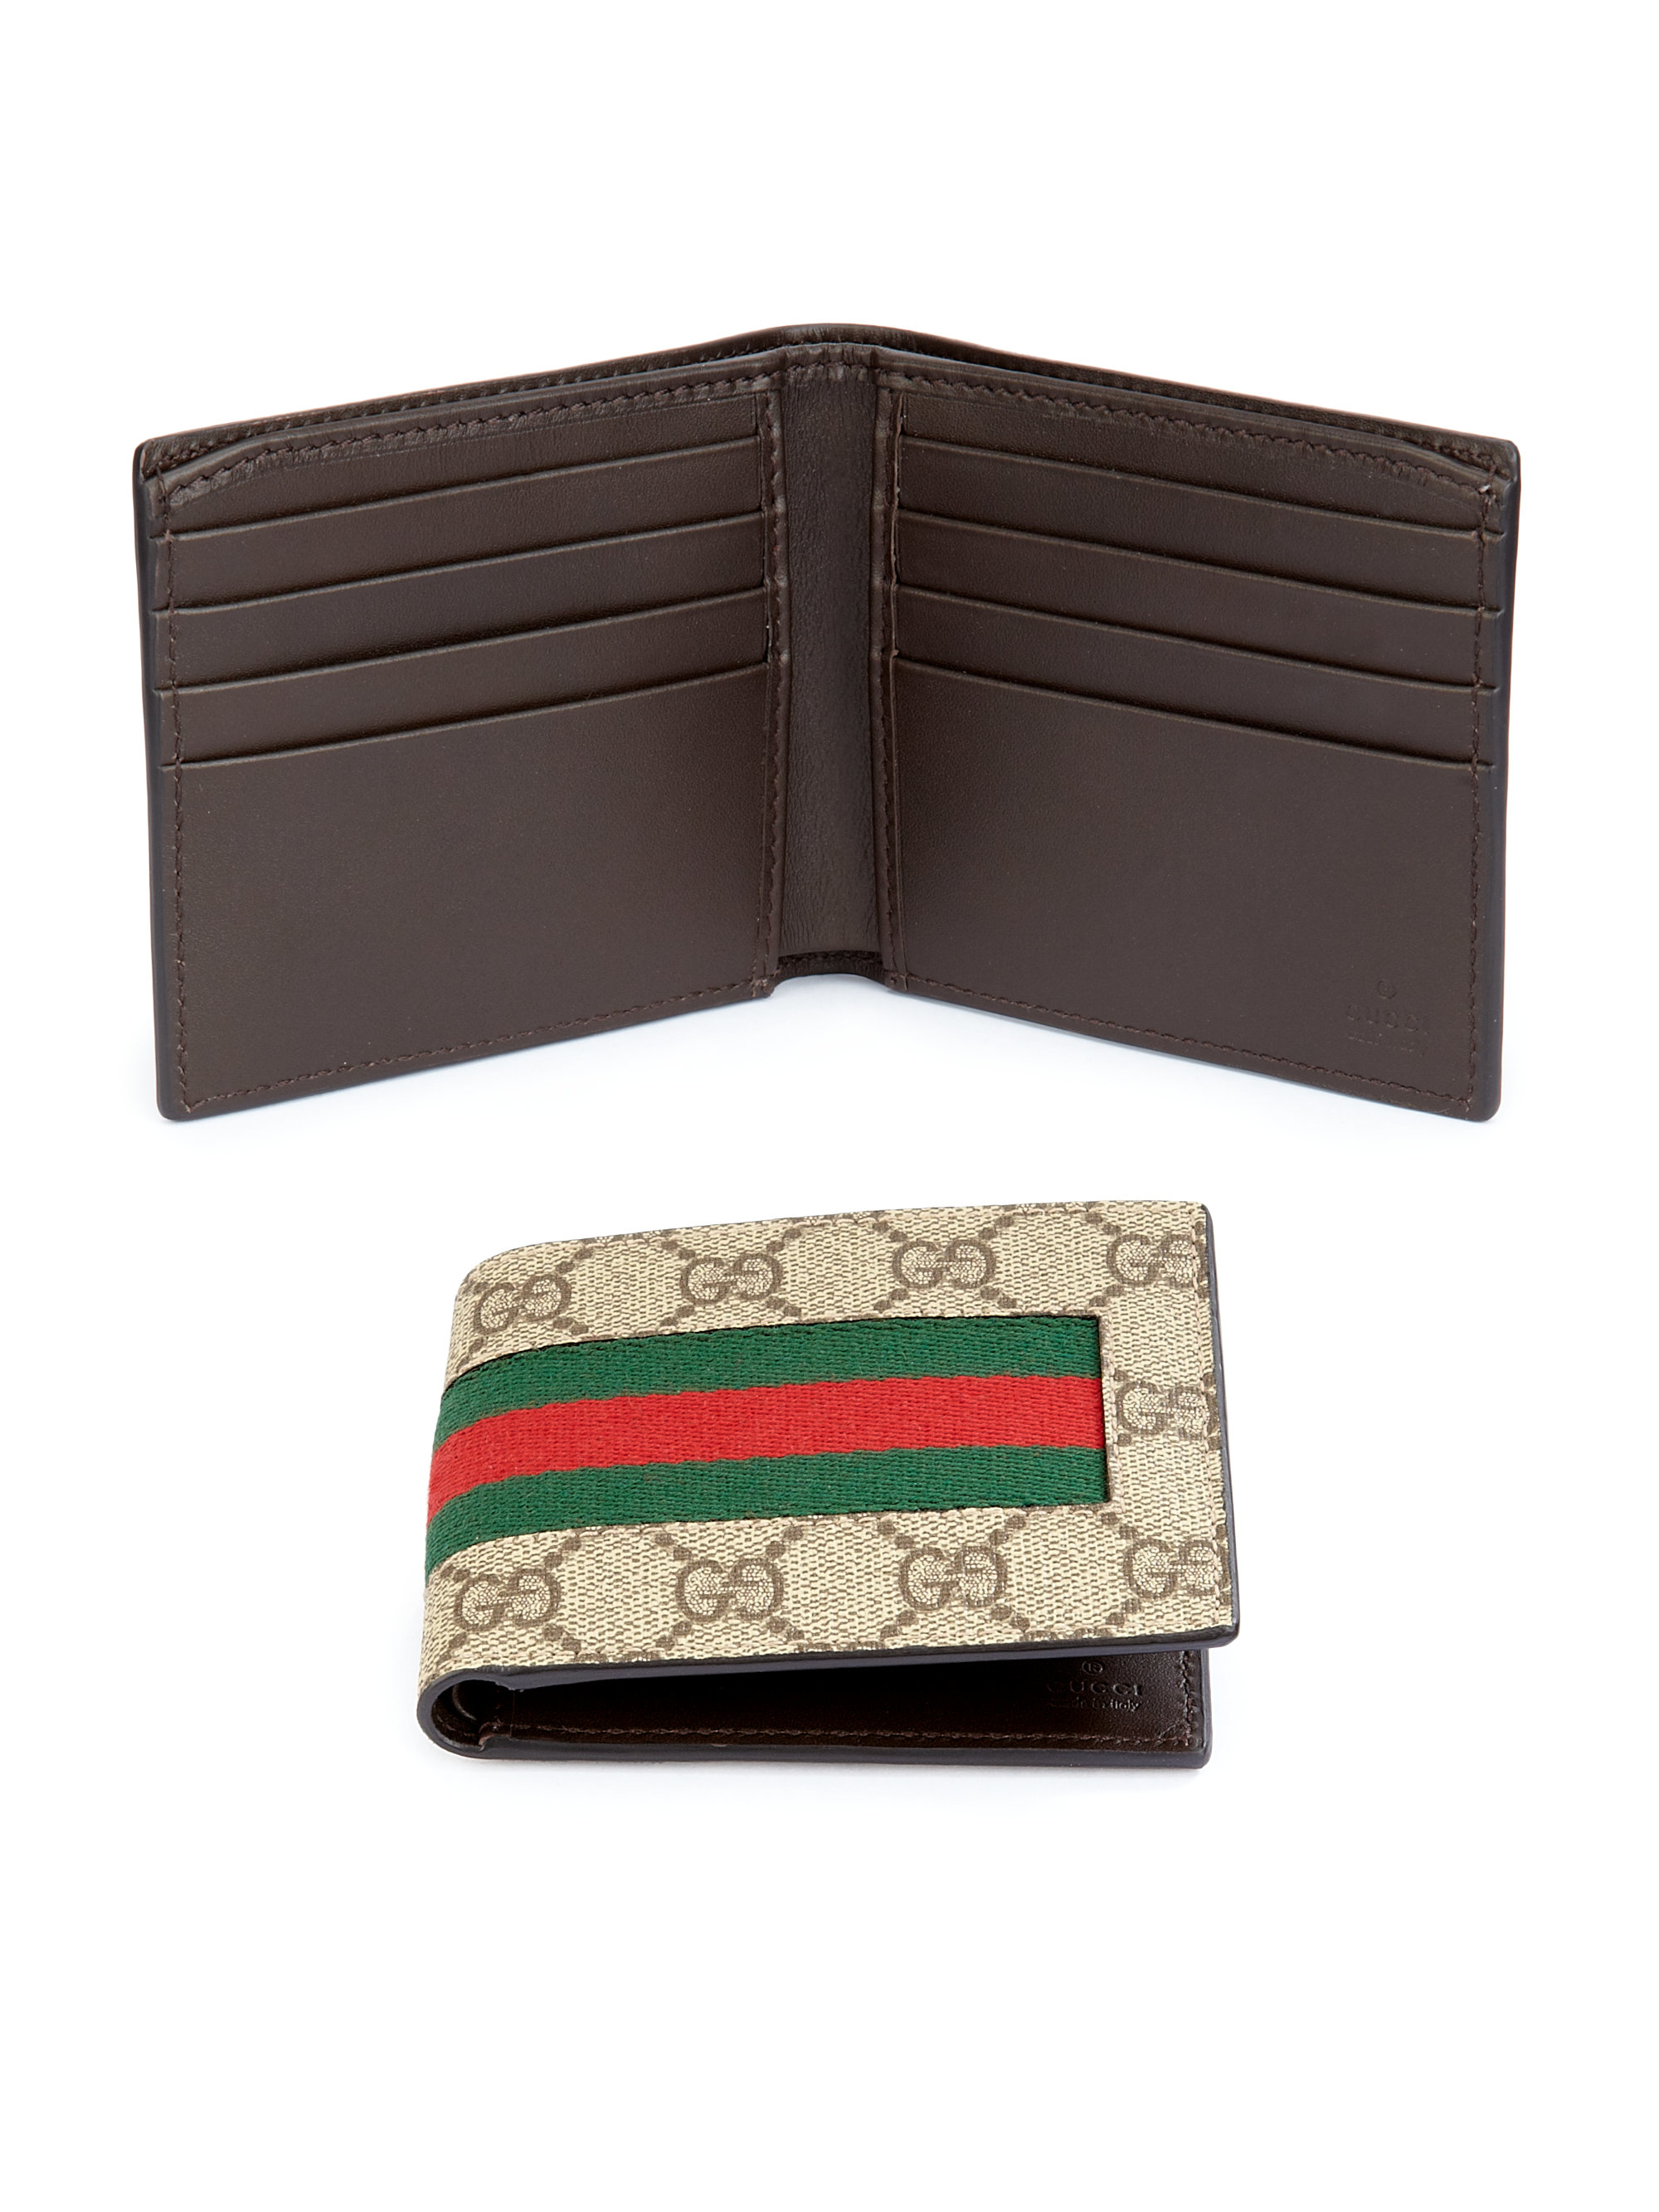 Gucci Gg Supreme Canvas Web Bifold Wallet in Green for Men | Lyst